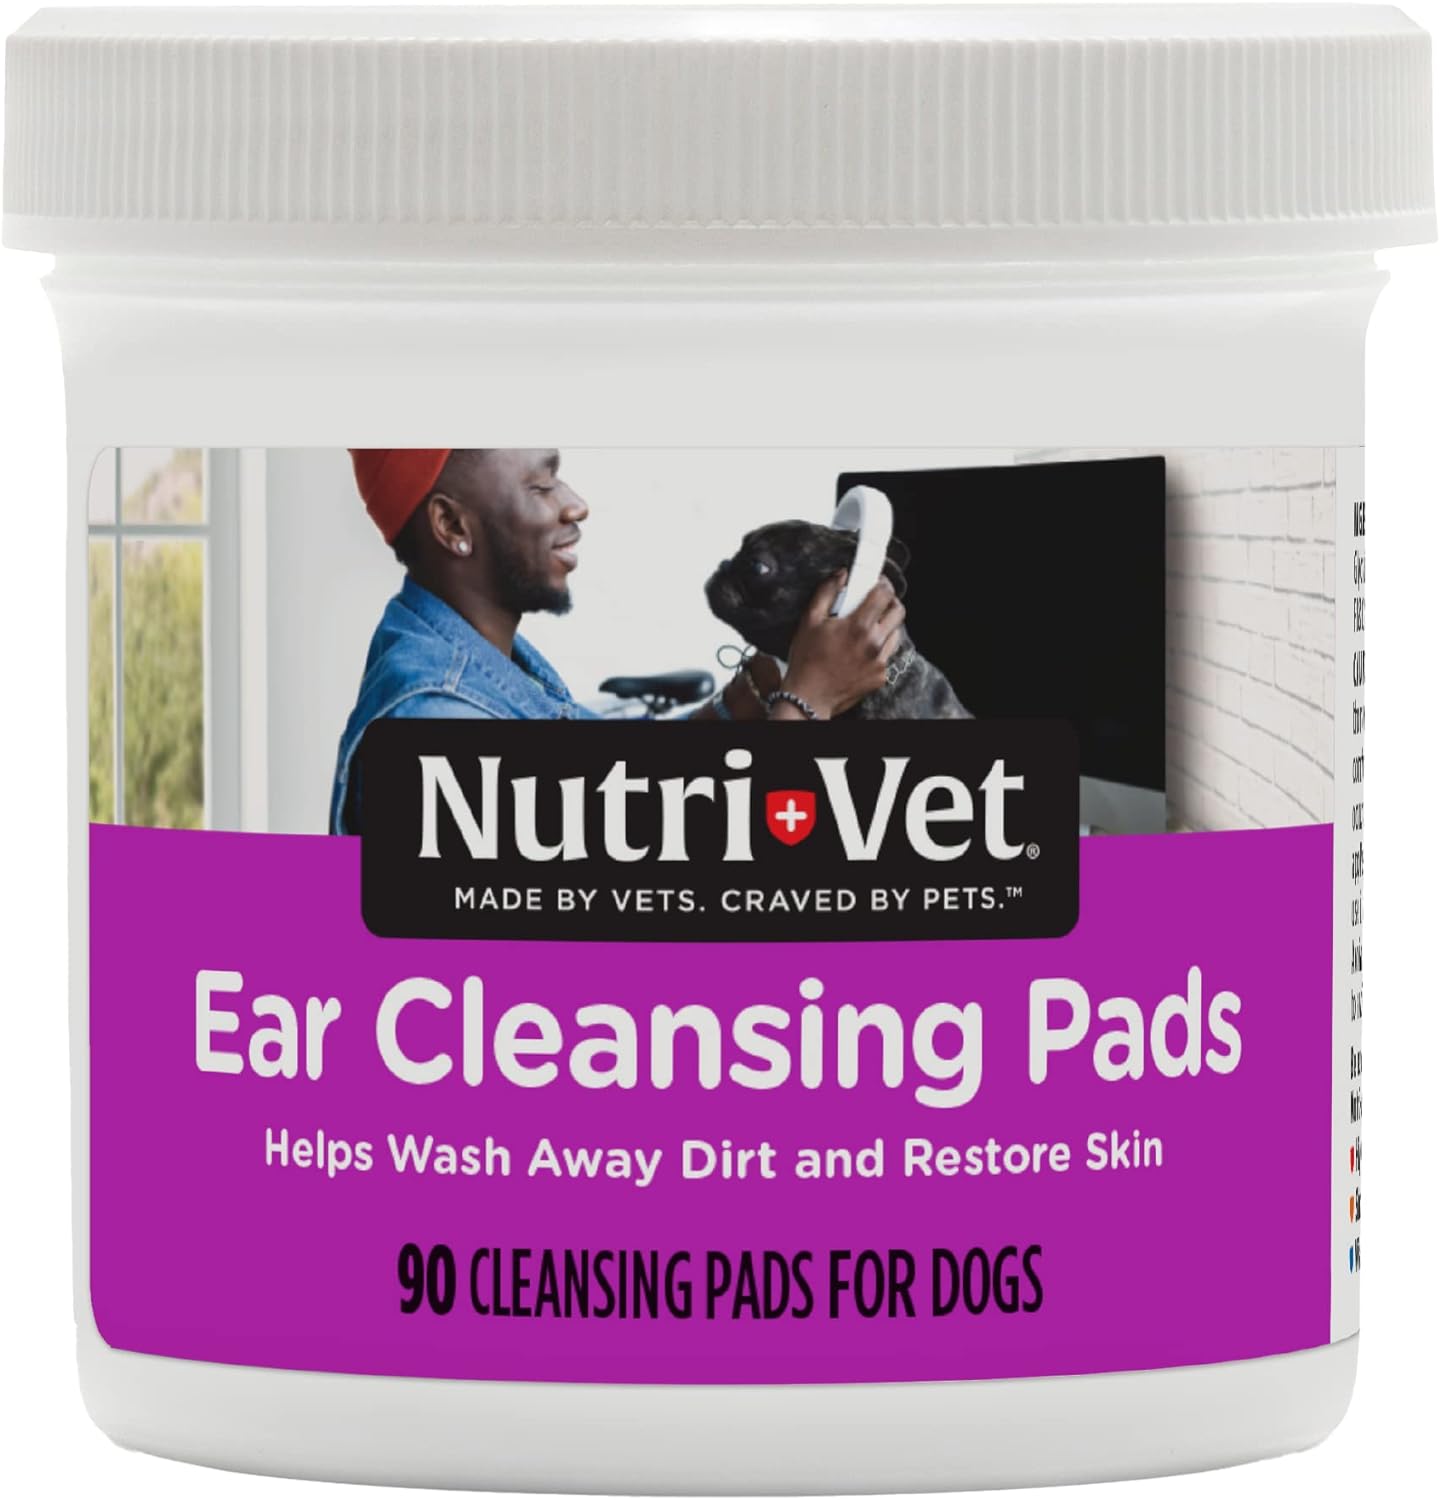 Nutri-Vet Ear Cleansing Pads for Dogs - Soothing & Non-Irritating - Removes Dirt & Wax Build Up - Maintain Dog Ear Health - 90 Count